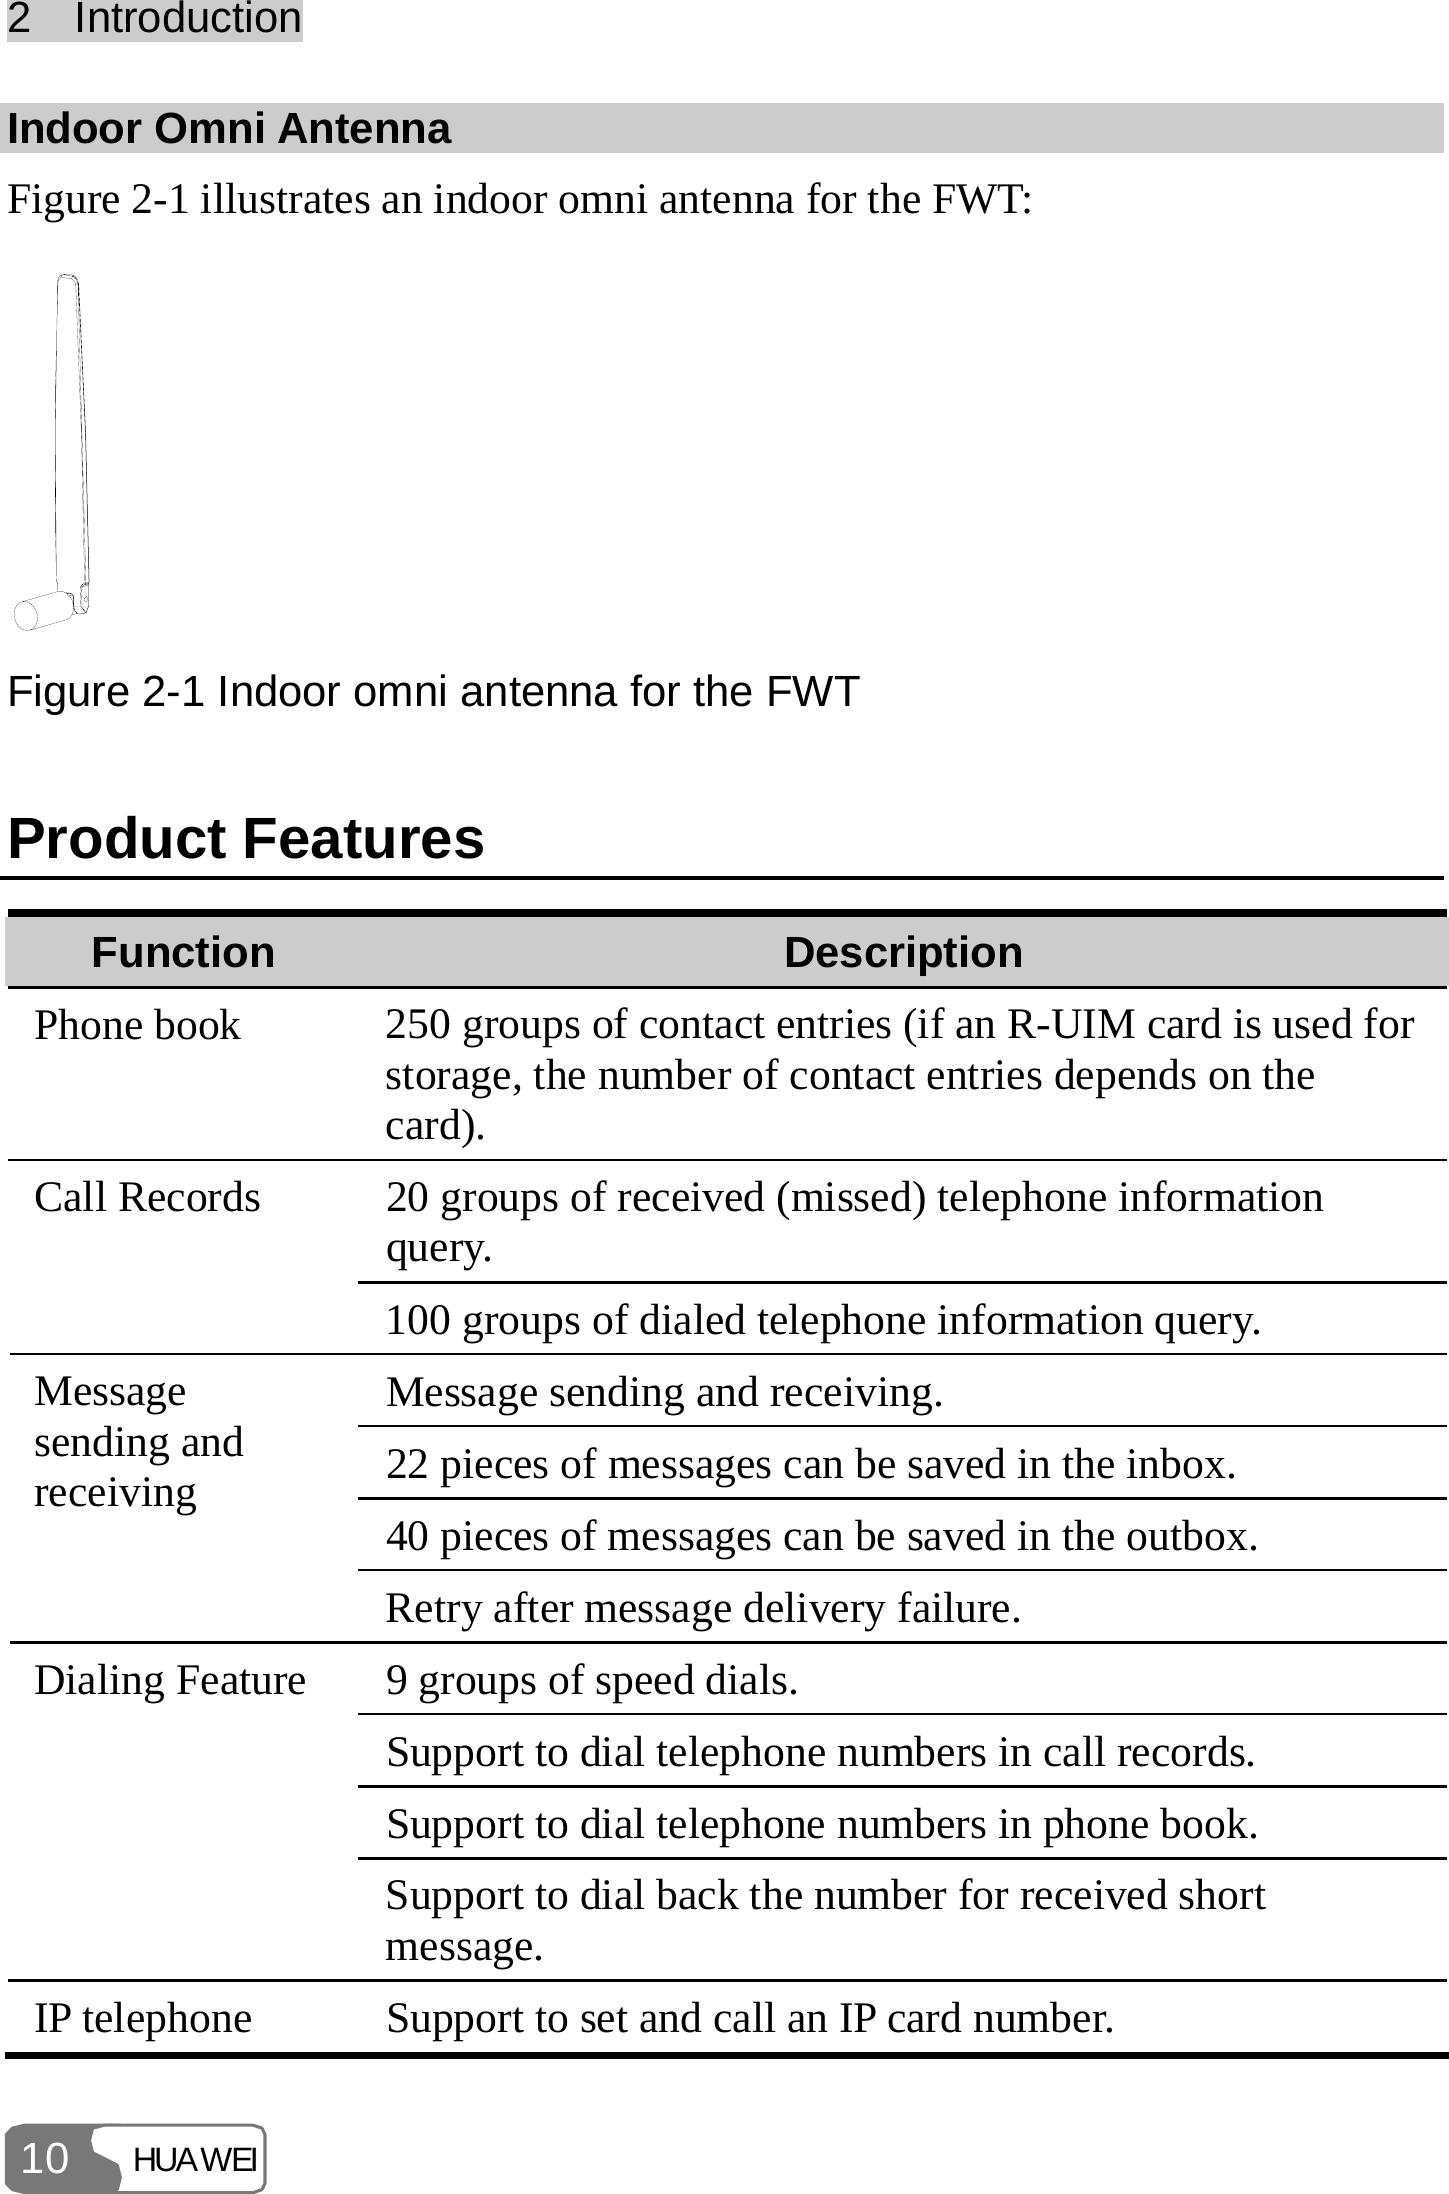 2  Introduction HUAWEI 10 Indoor Omni Antenna   Figure 2-1 illustrates an indoor omni antenna for the FWT:  Figure 2-1 Indoor omni antenna for the FWT Product Features Function  Description Phone book  250 groups of contact entries (if an R-UIM card is used for storage, the number of contact entries depends on the card). 20 groups of received (missed) telephone information query. Call Records 100 groups of dialed telephone information query. Message sending and receiving. 22 pieces of messages can be saved in the inbox. 40 pieces of messages can be saved in the outbox. Message sending and receiving Retry after message delivery failure. 9 groups of speed dials. Support to dial telephone numbers in call records. Support to dial telephone numbers in phone book. Dialing Feature Support to dial back the number for received short message. IP telephone  Support to set and call an IP card number. 